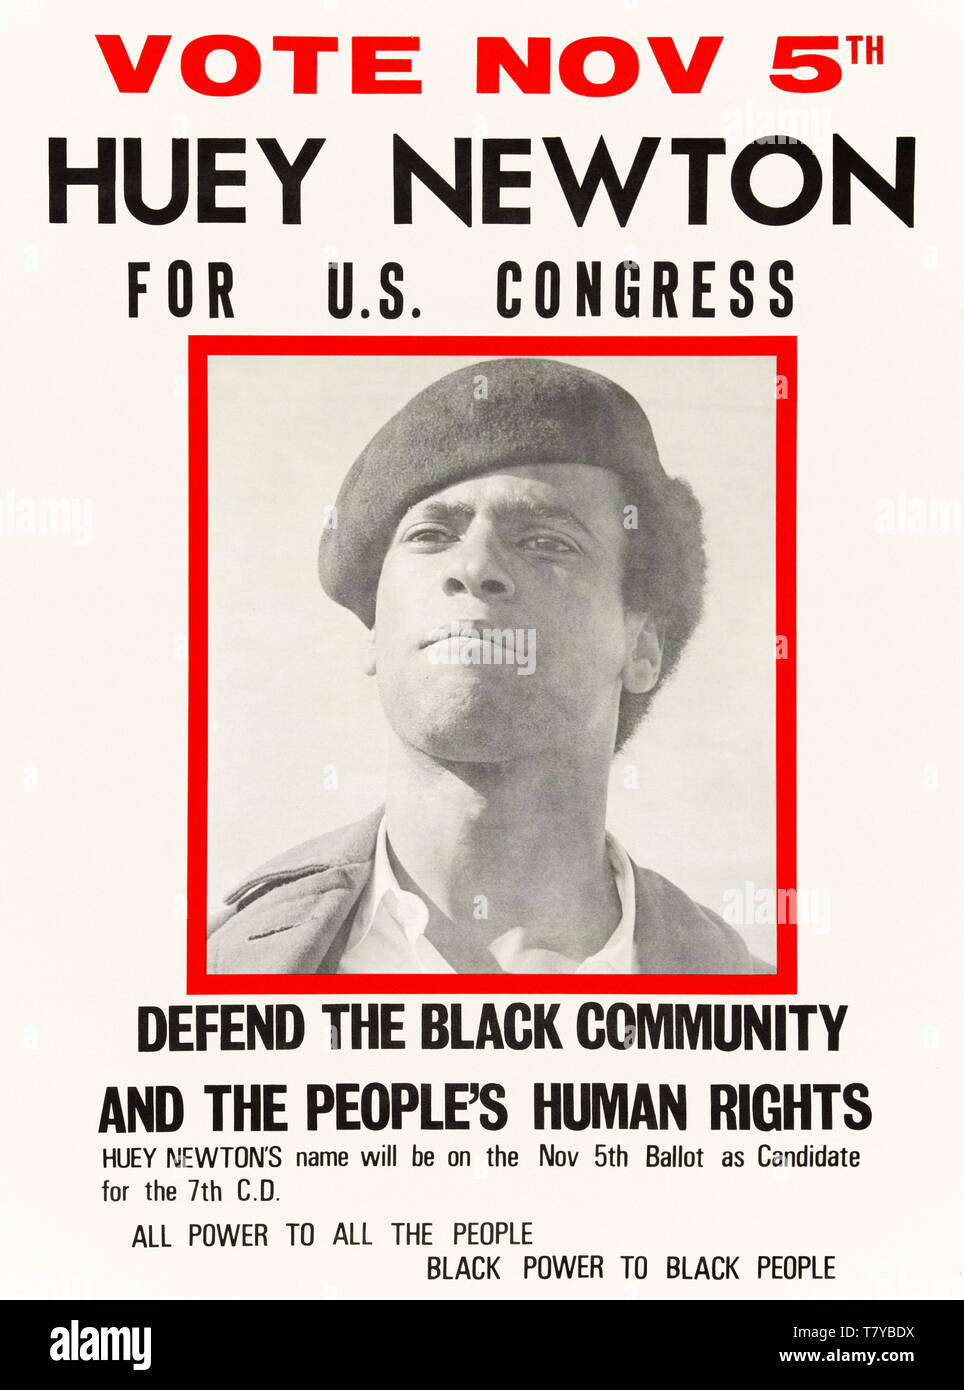 Vote Nov 5th HUEY NEWTON for U.S. Congress 1968 poster for Huey Percy Newton (1942-1989) for the Peace and Freedom Party. See description for more information. Stock Photo